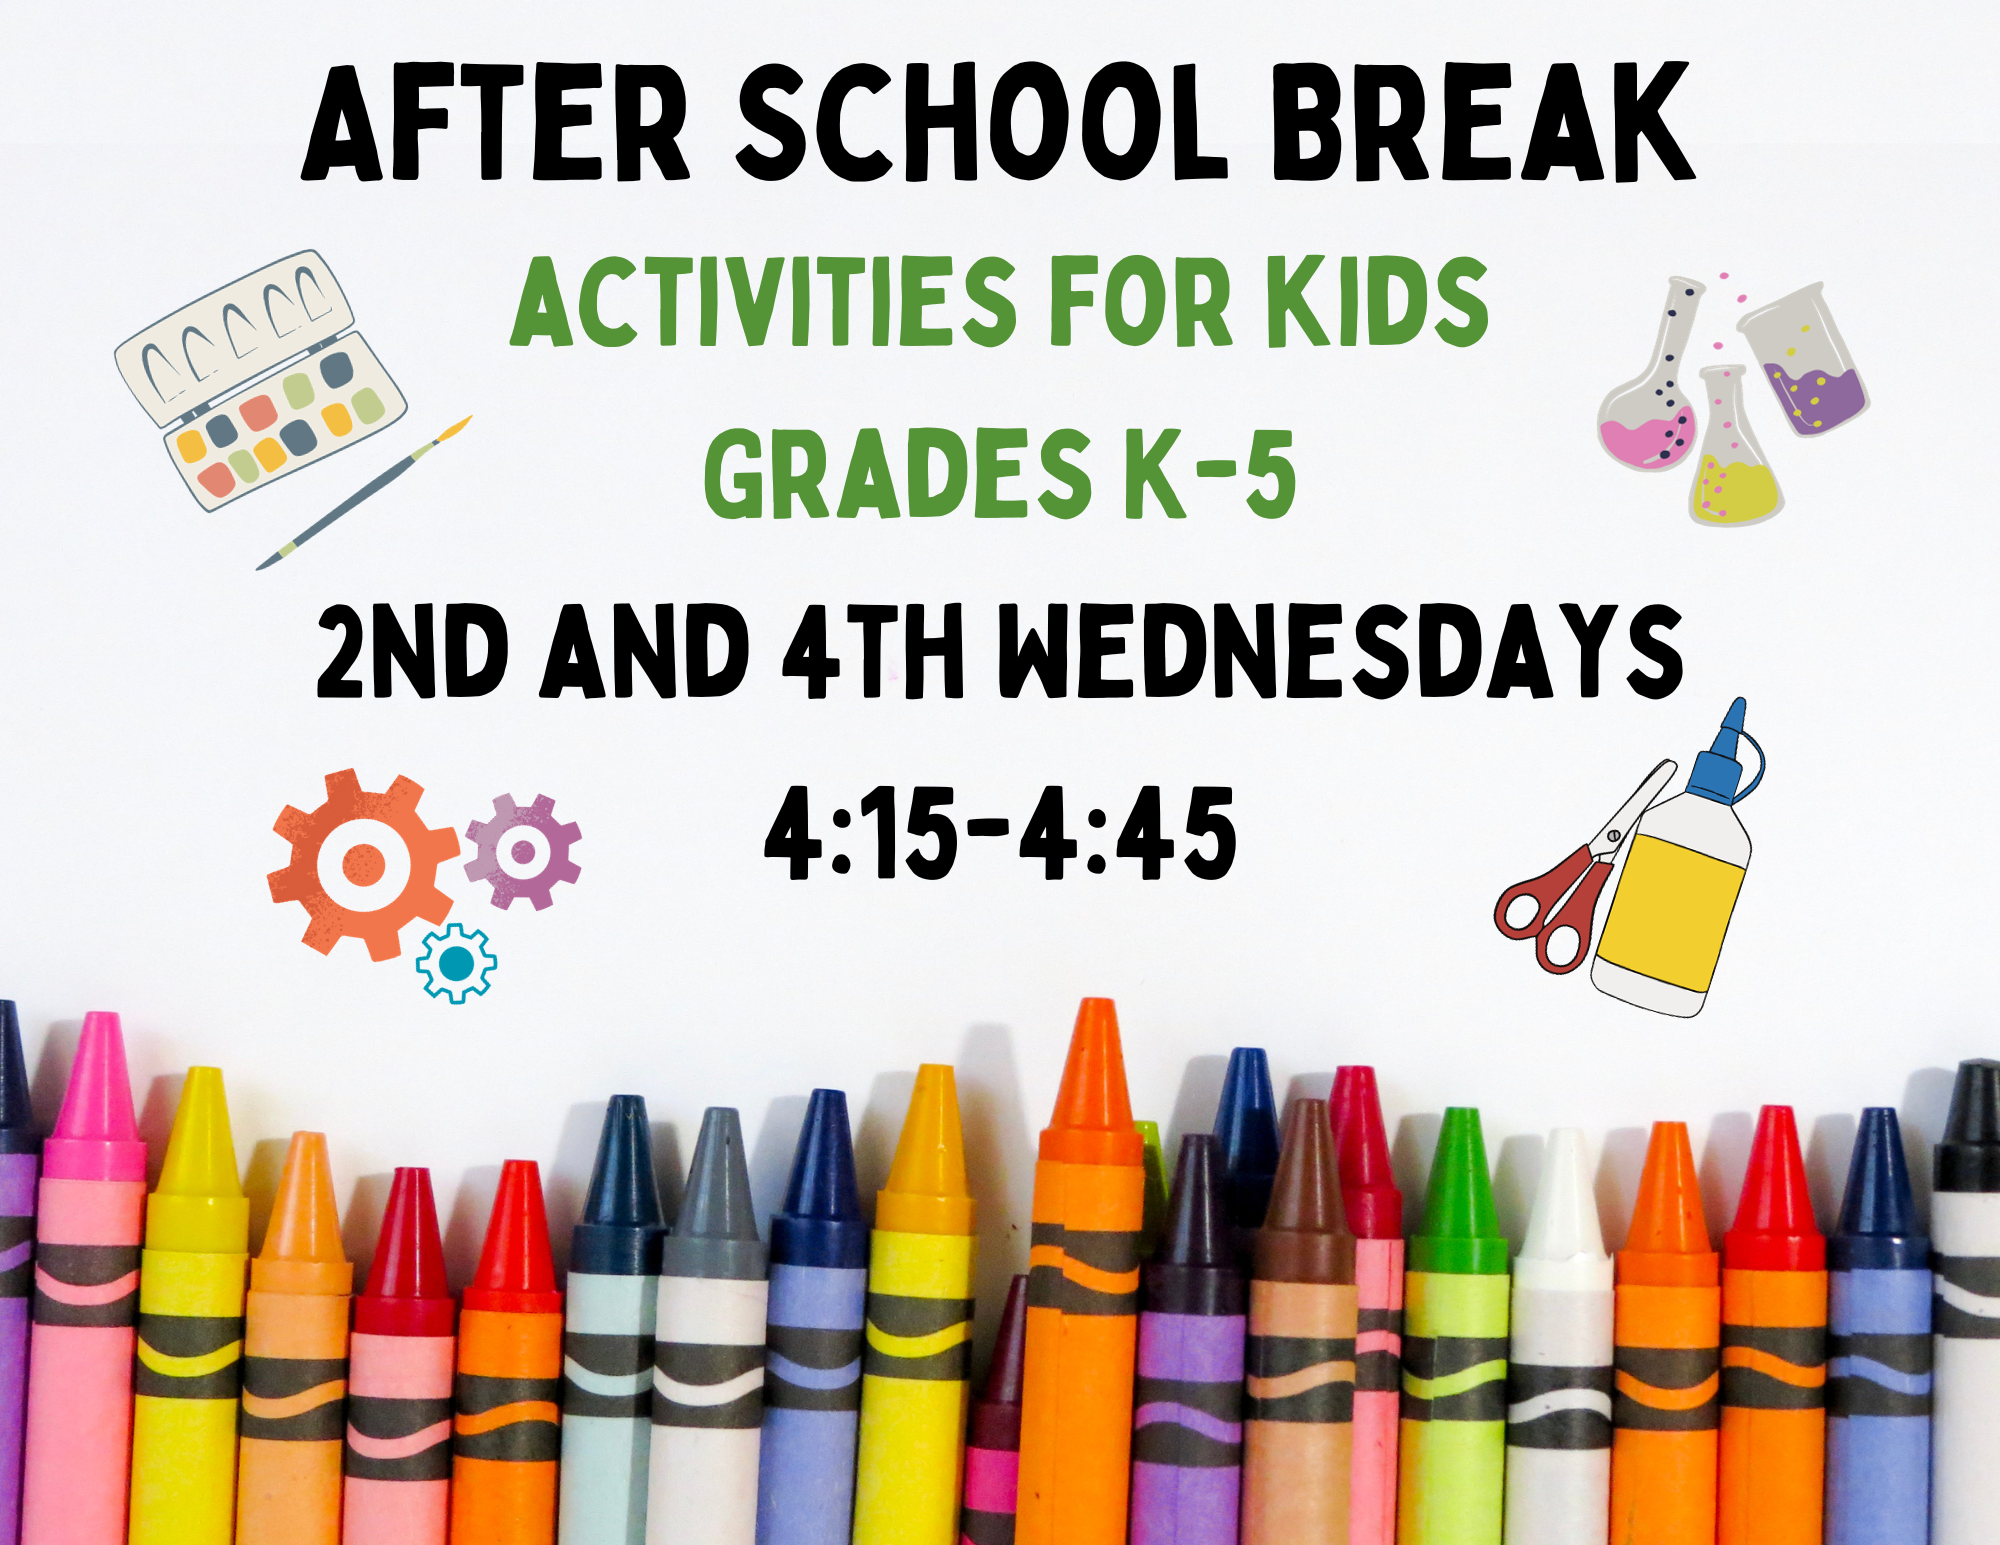 After School Break Activities for Kids Grades K-5 2nd and 4th Wednesdays 415 to 445